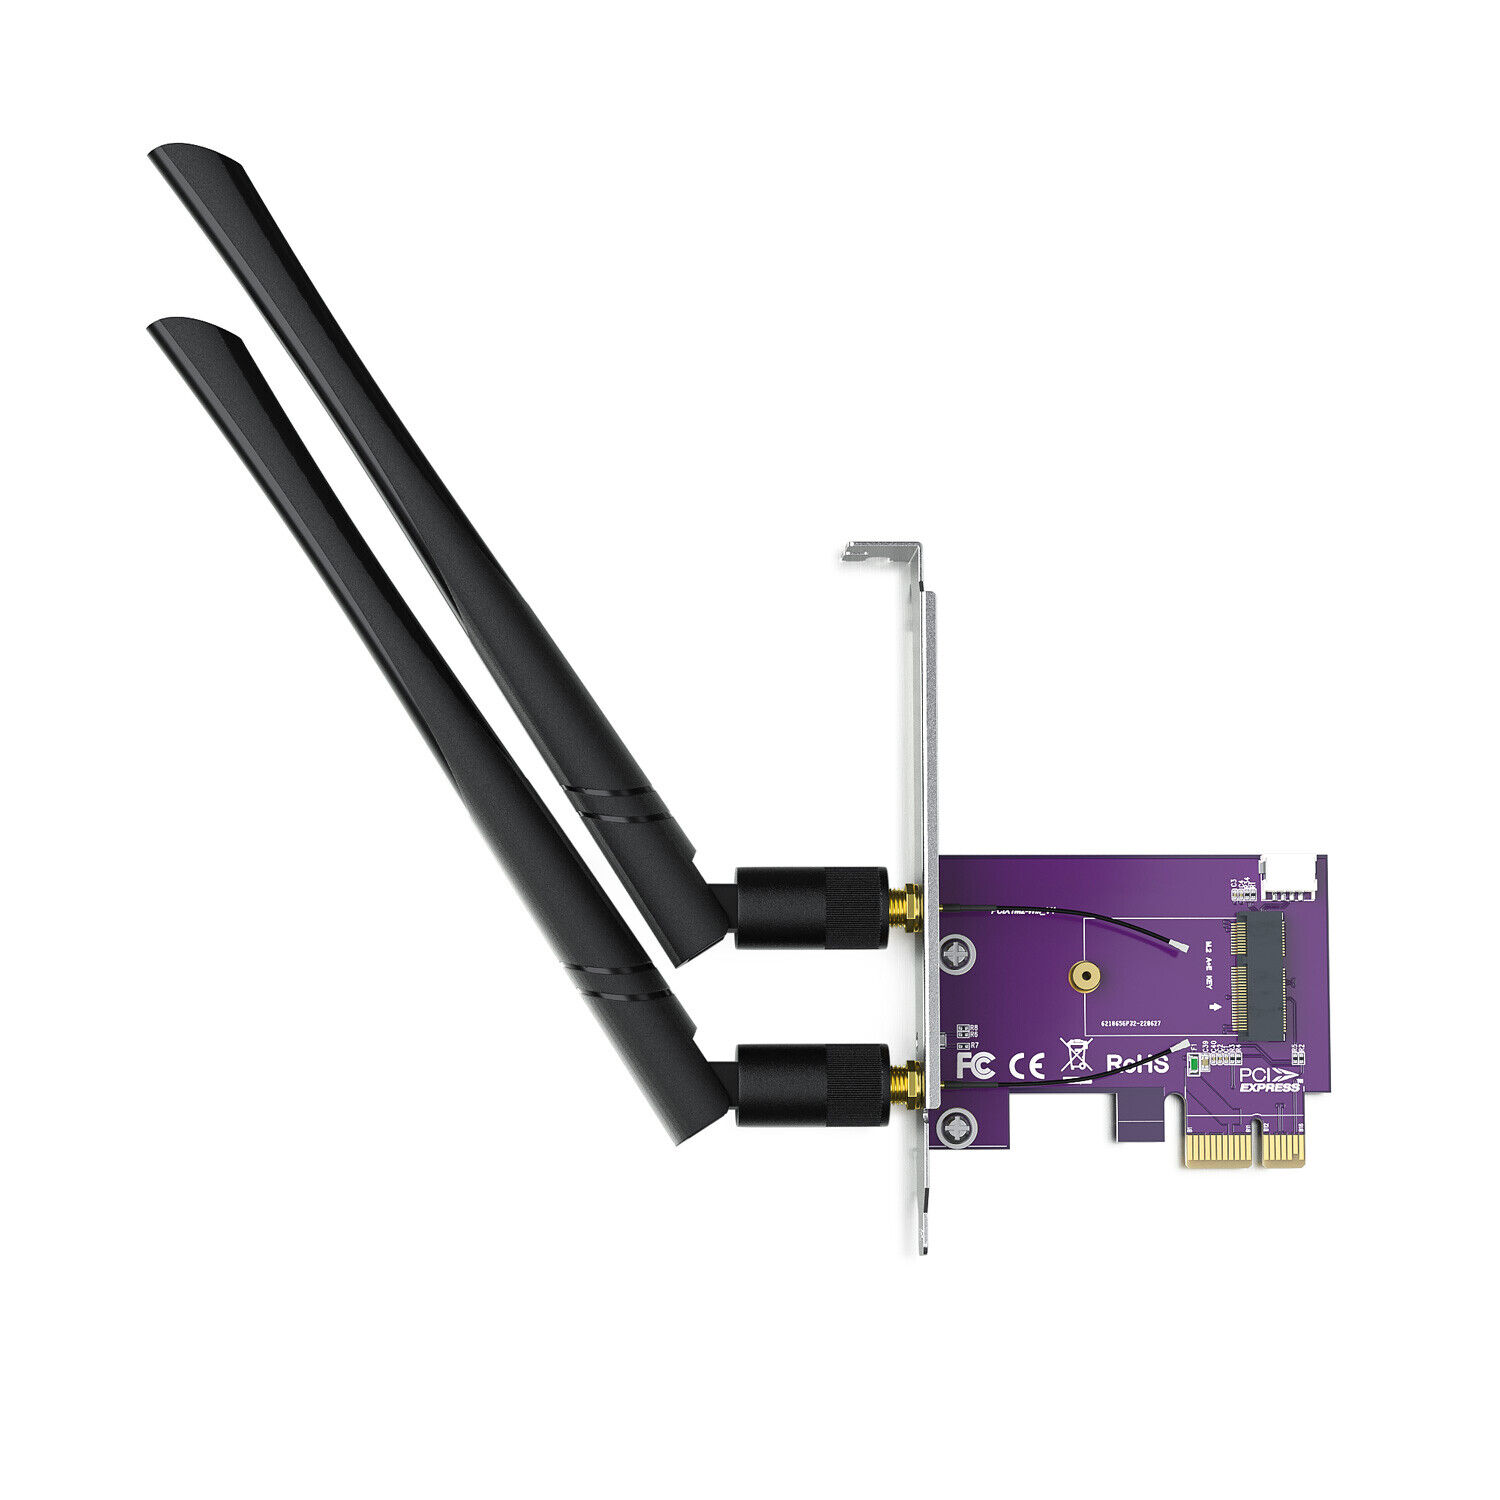 PCIe to M.2 WiFi Adapter, Wireless WiFi Bluetooth Network Card Adapter